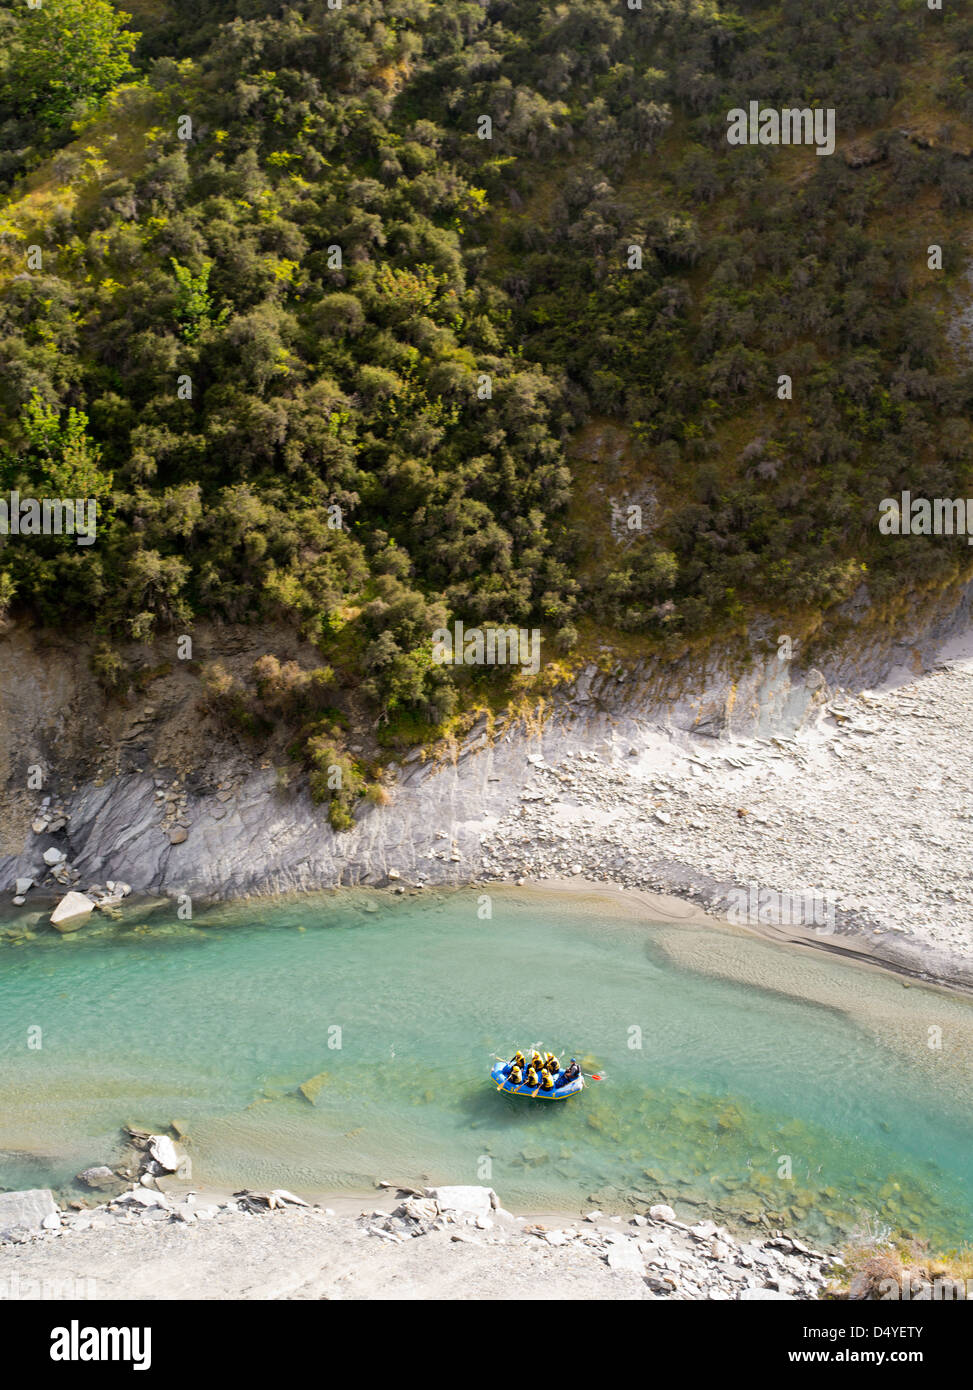 A group of people rafts down the Shotover River in Skipper's Canyon, near Queenstown, Otago, New Zealand. Stock Photo